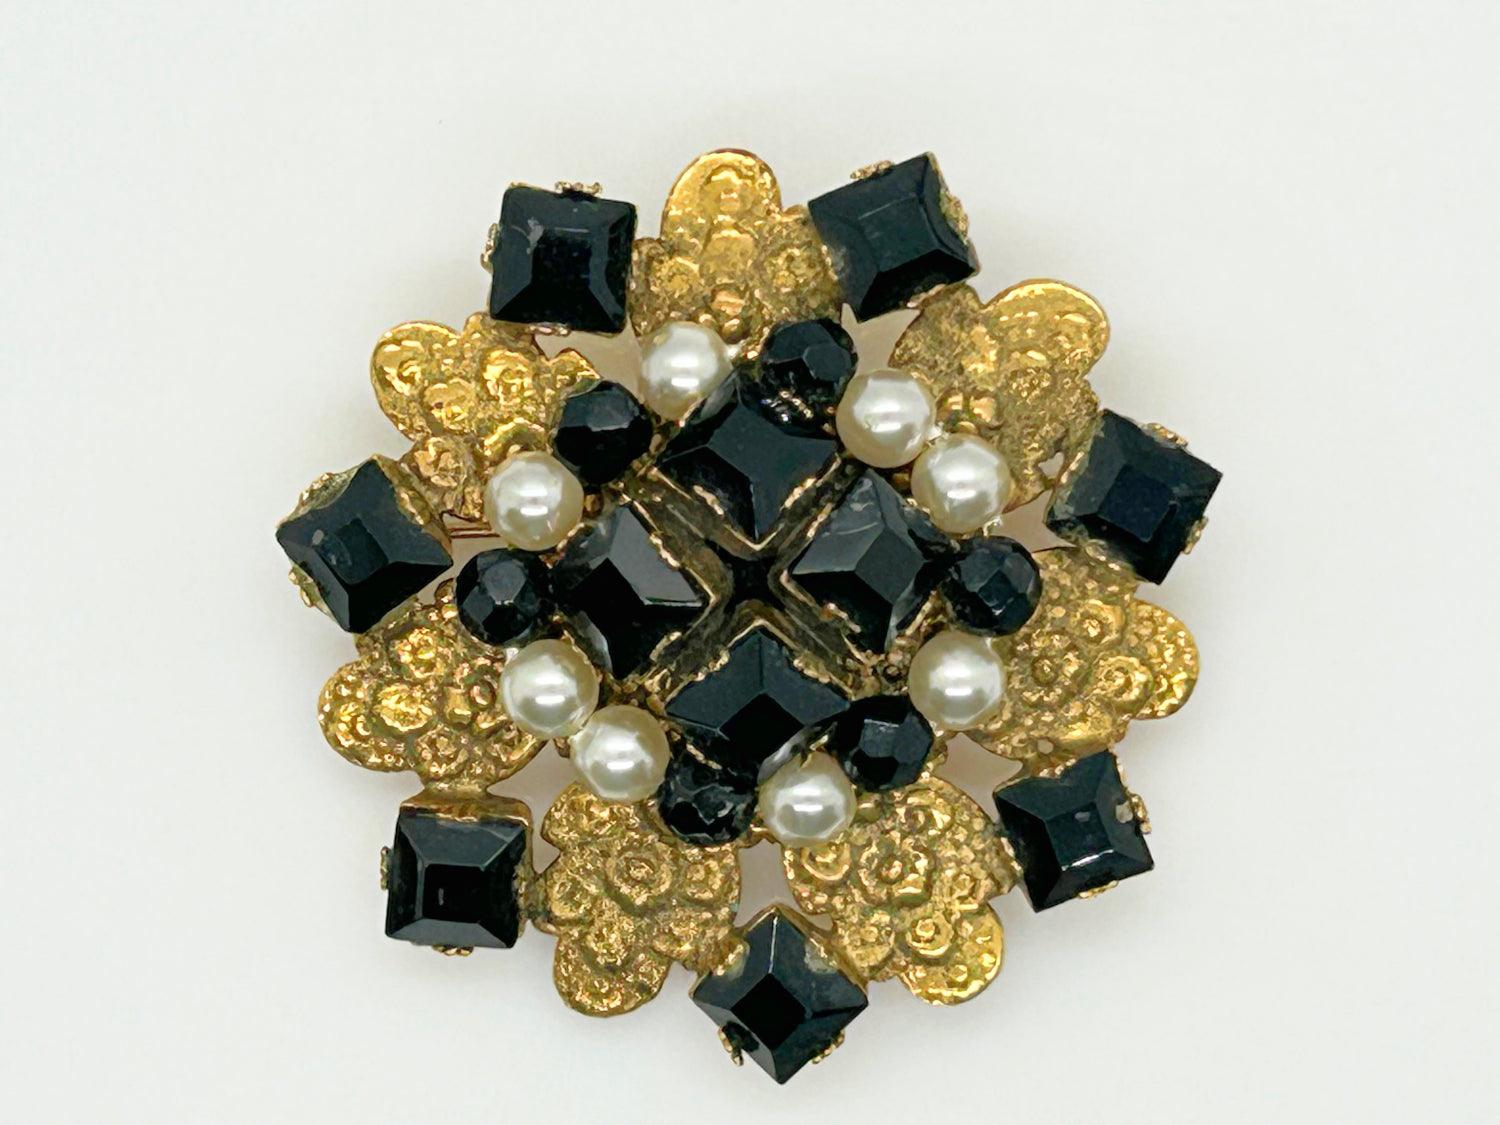 Detailed Vintage Frierich Brooch with Black Beads and Faux Pearls - Lamoree’s Vintage